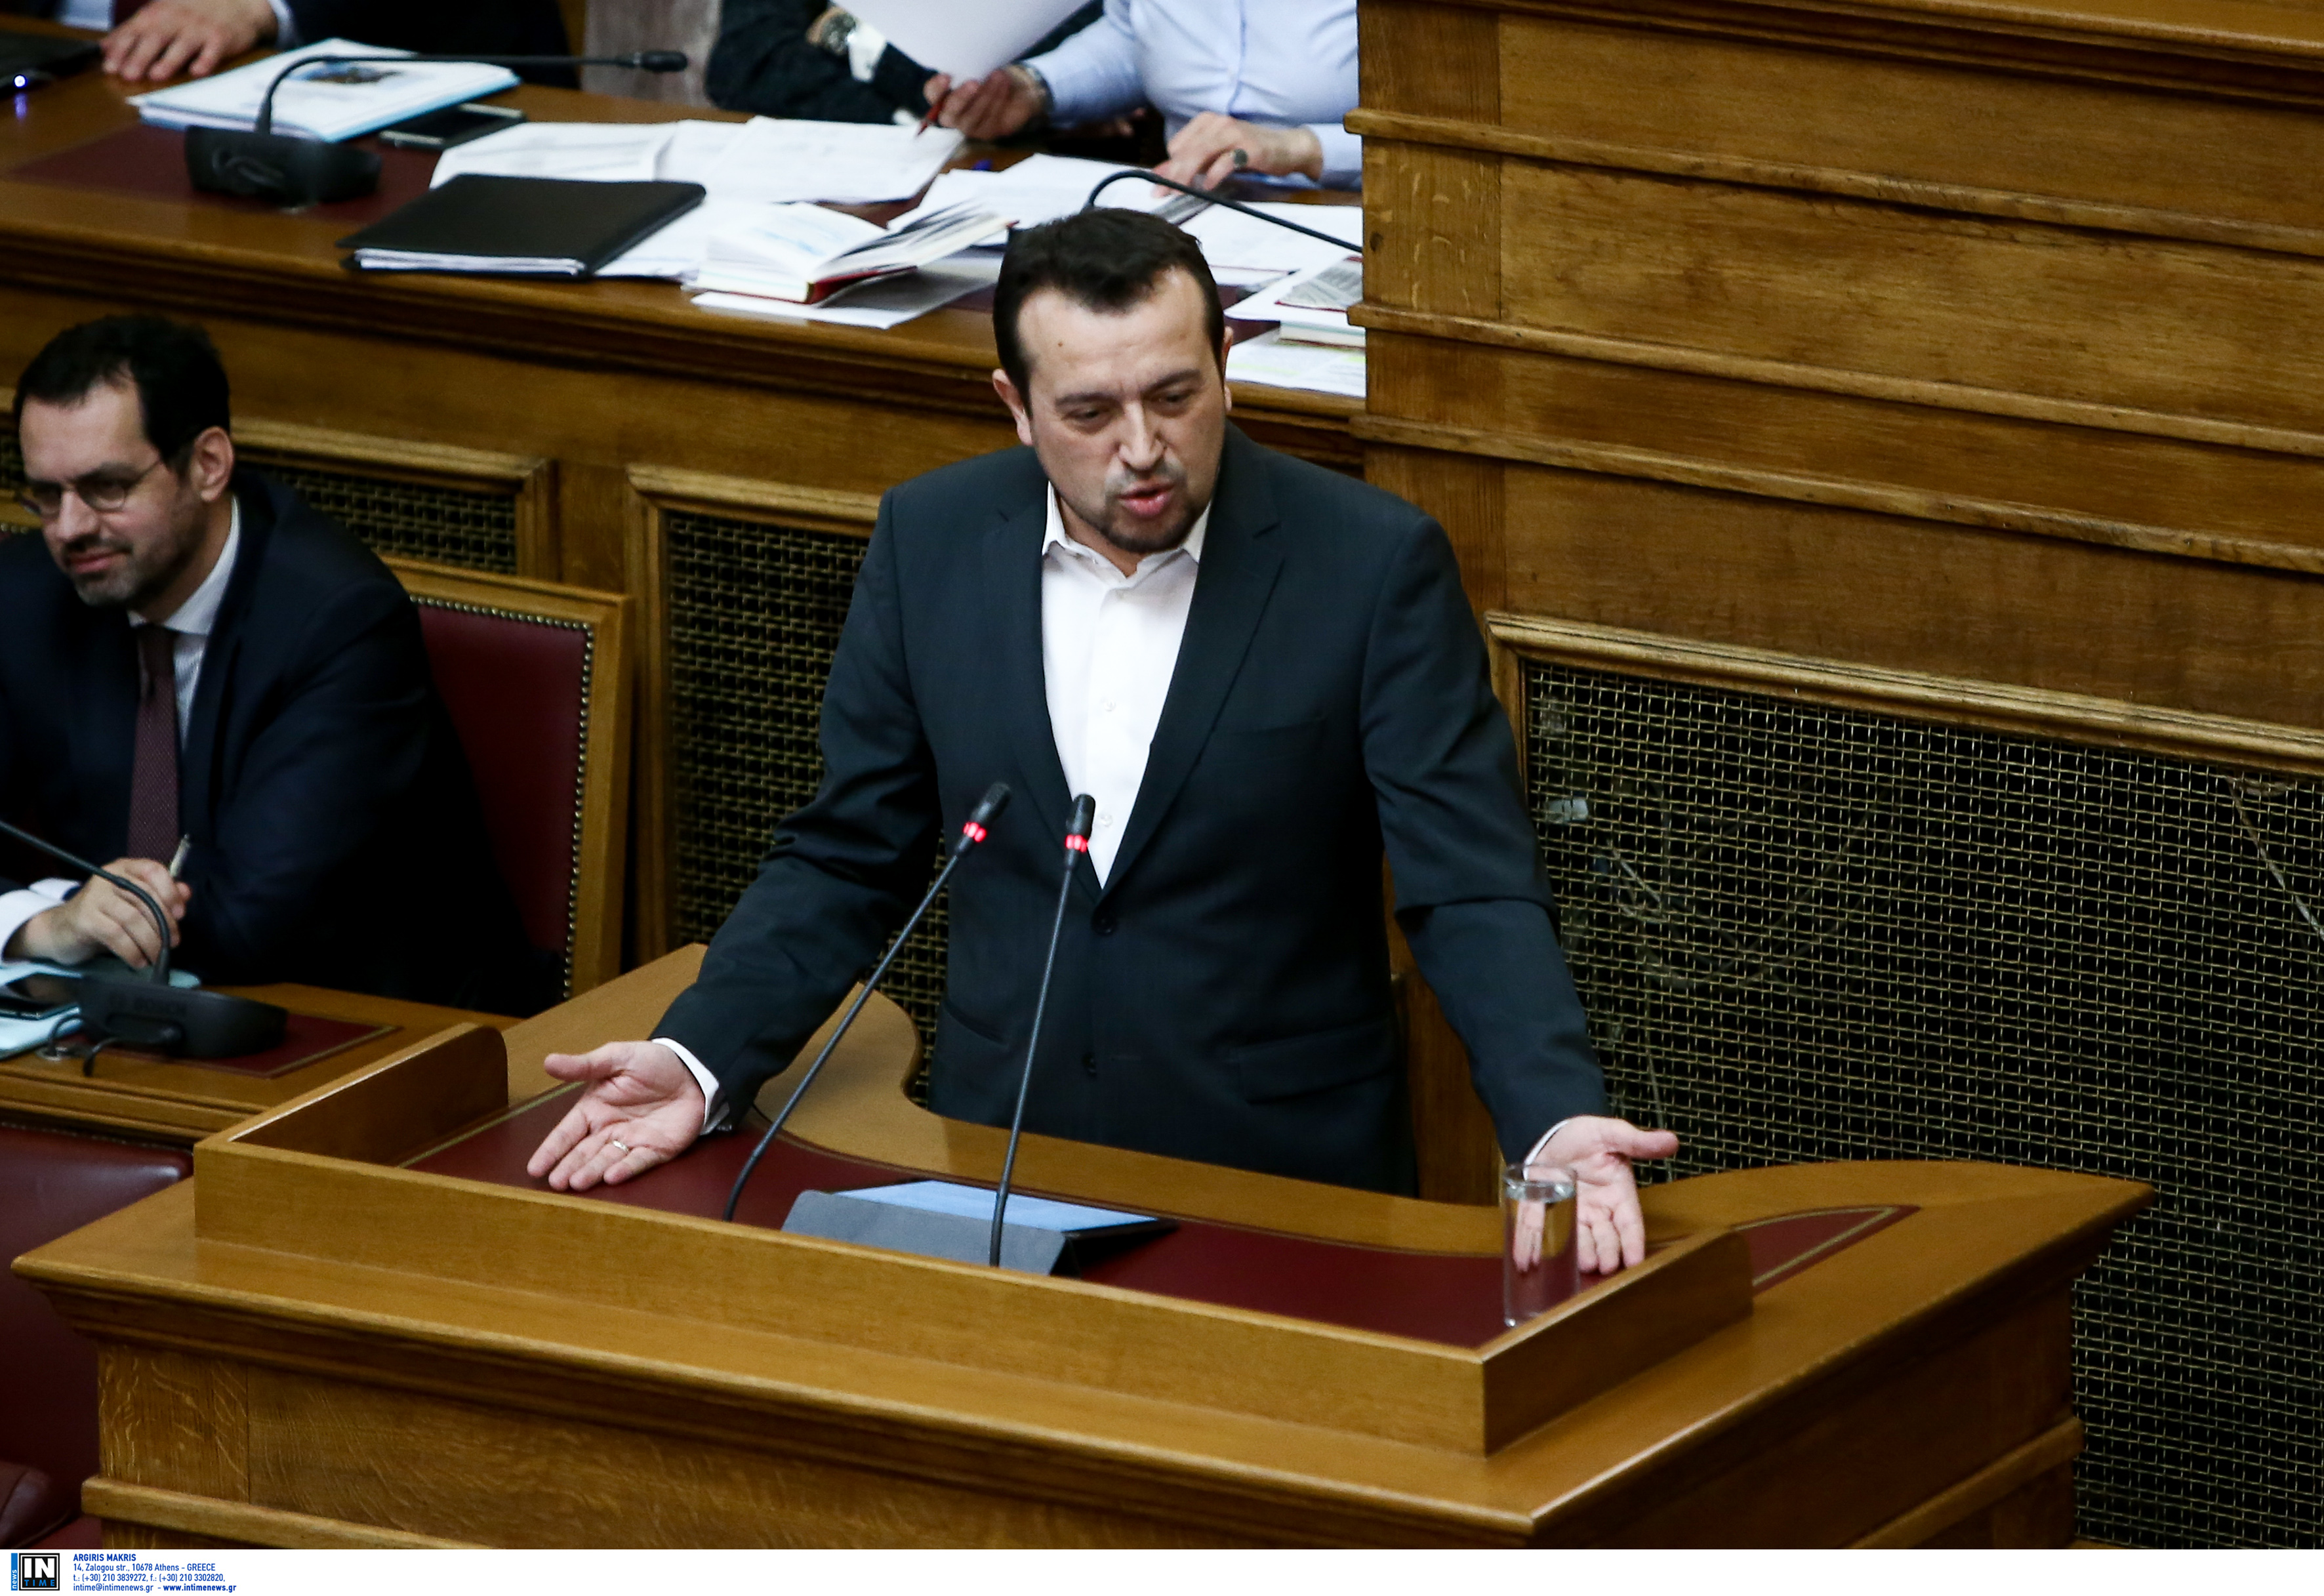 Digital Policy Minister Nikos Pappas condemns courthouse blast